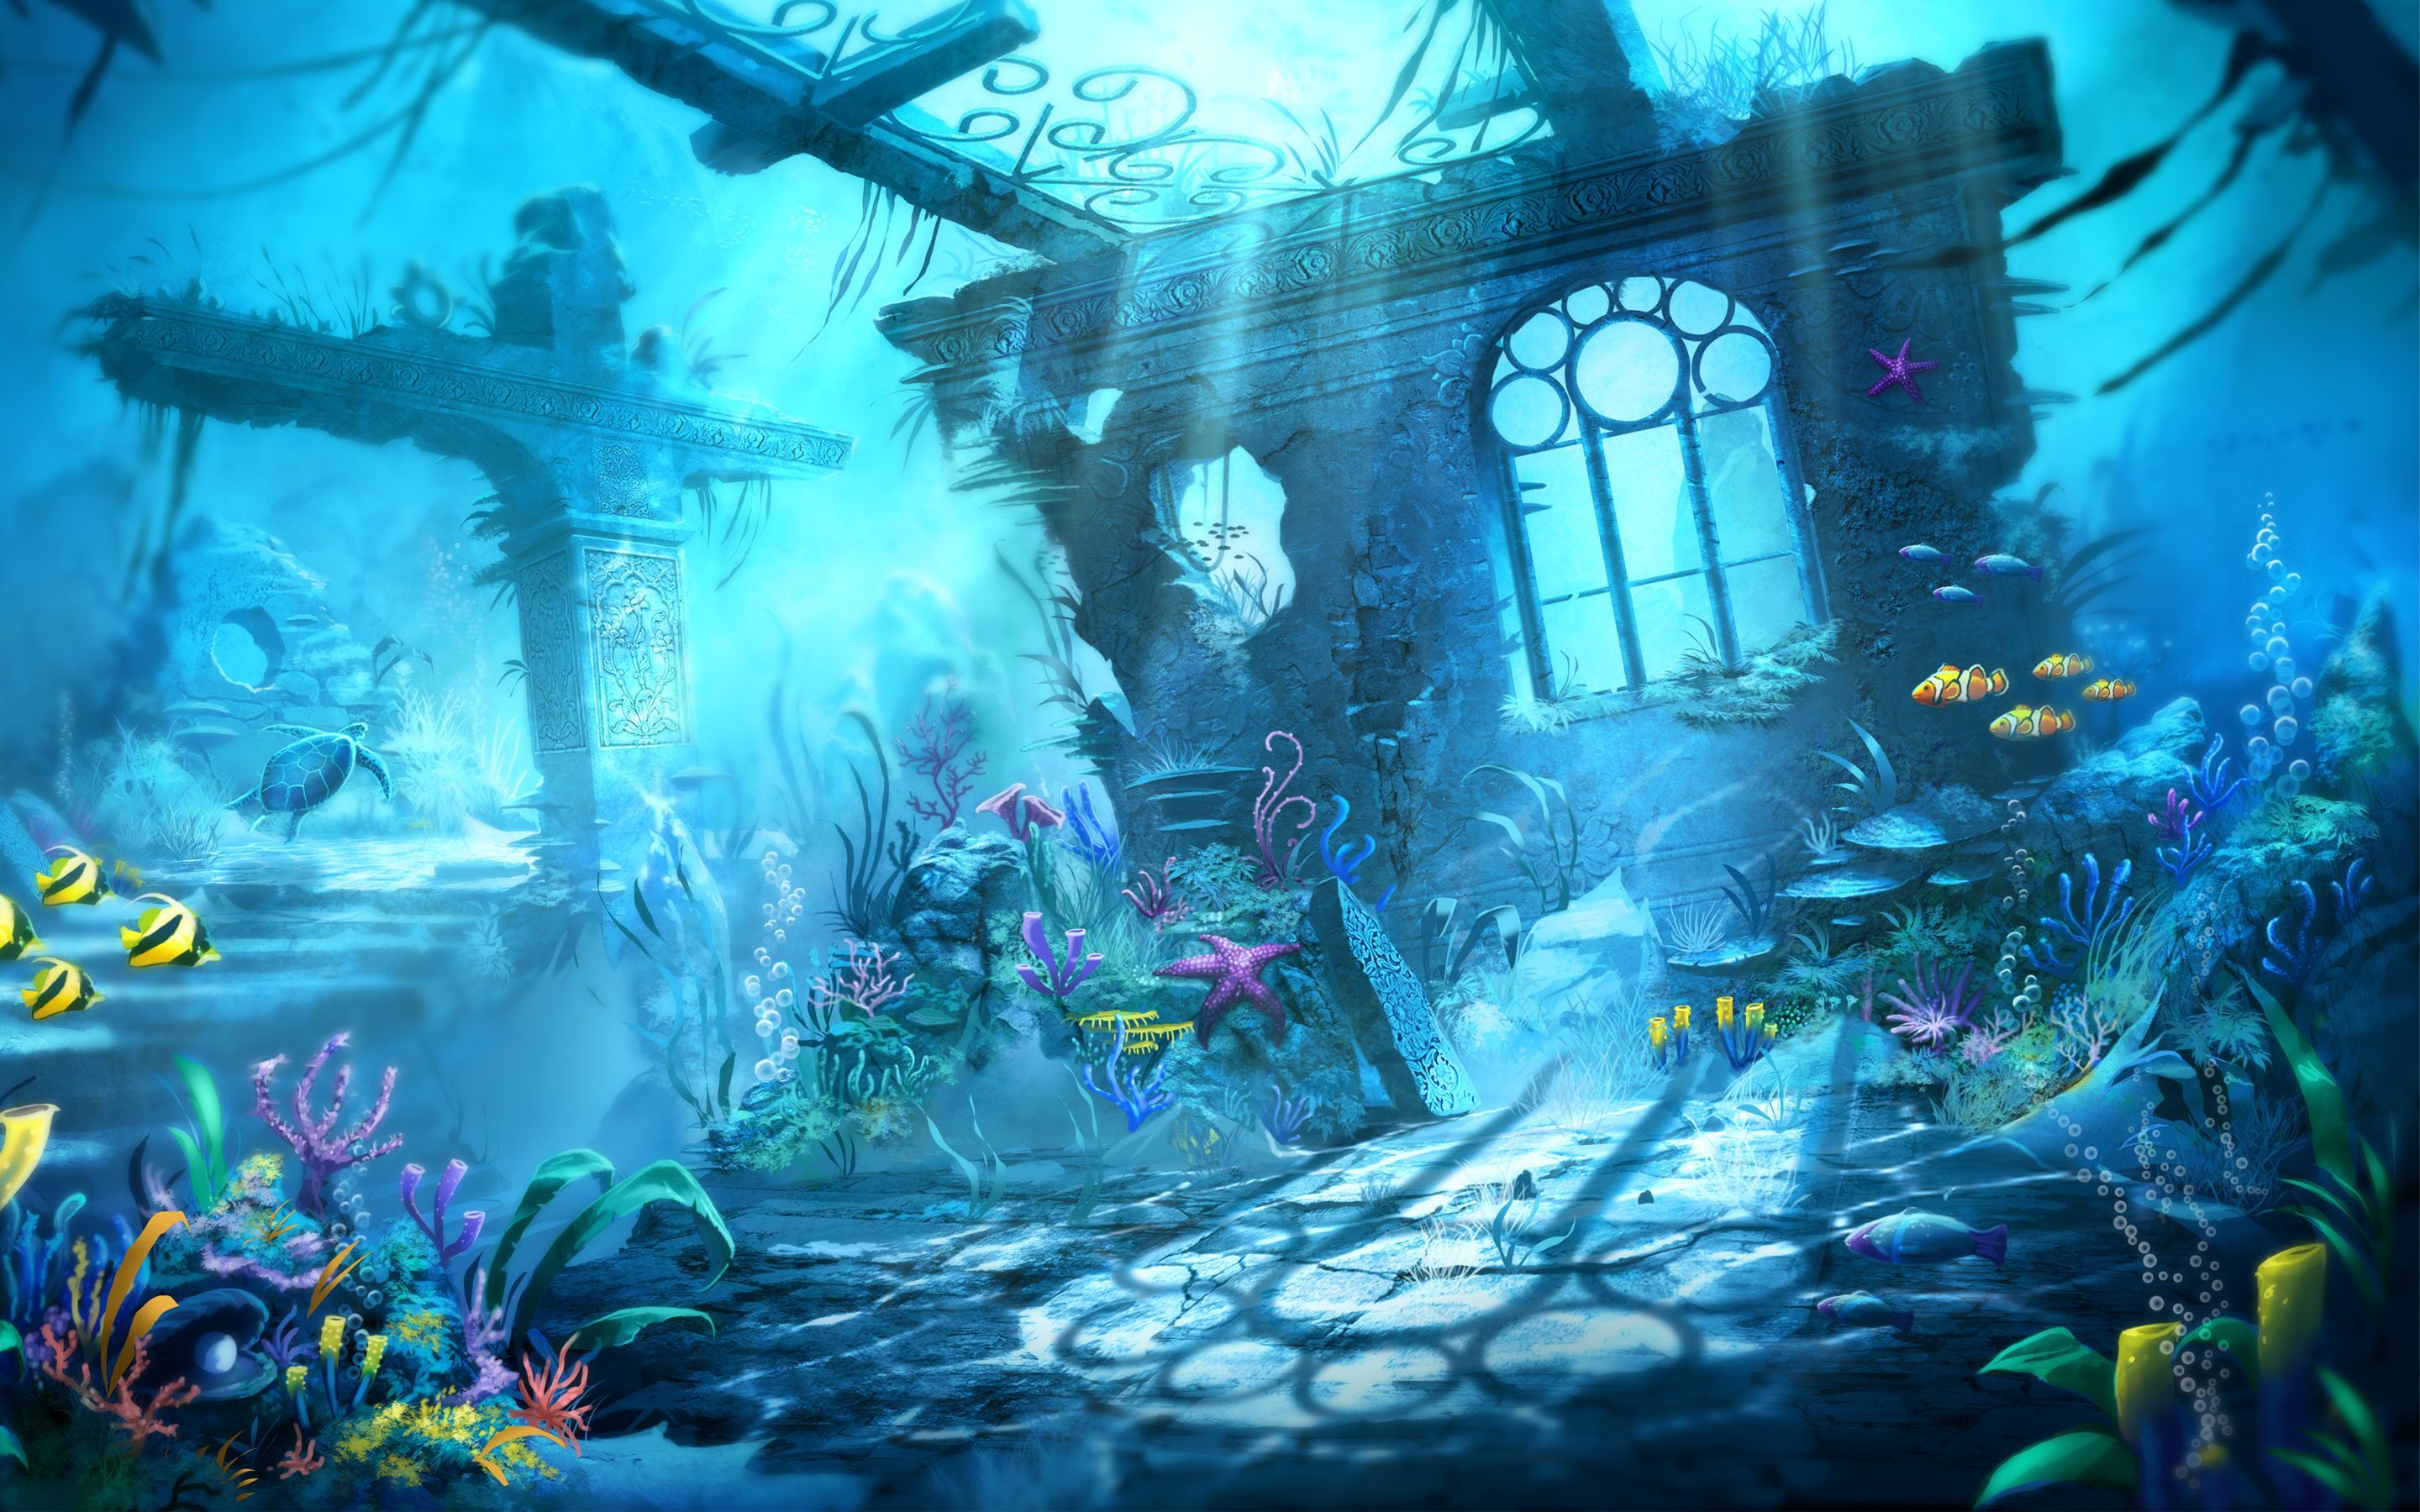 The underwater scene with a house and fish - Underwater